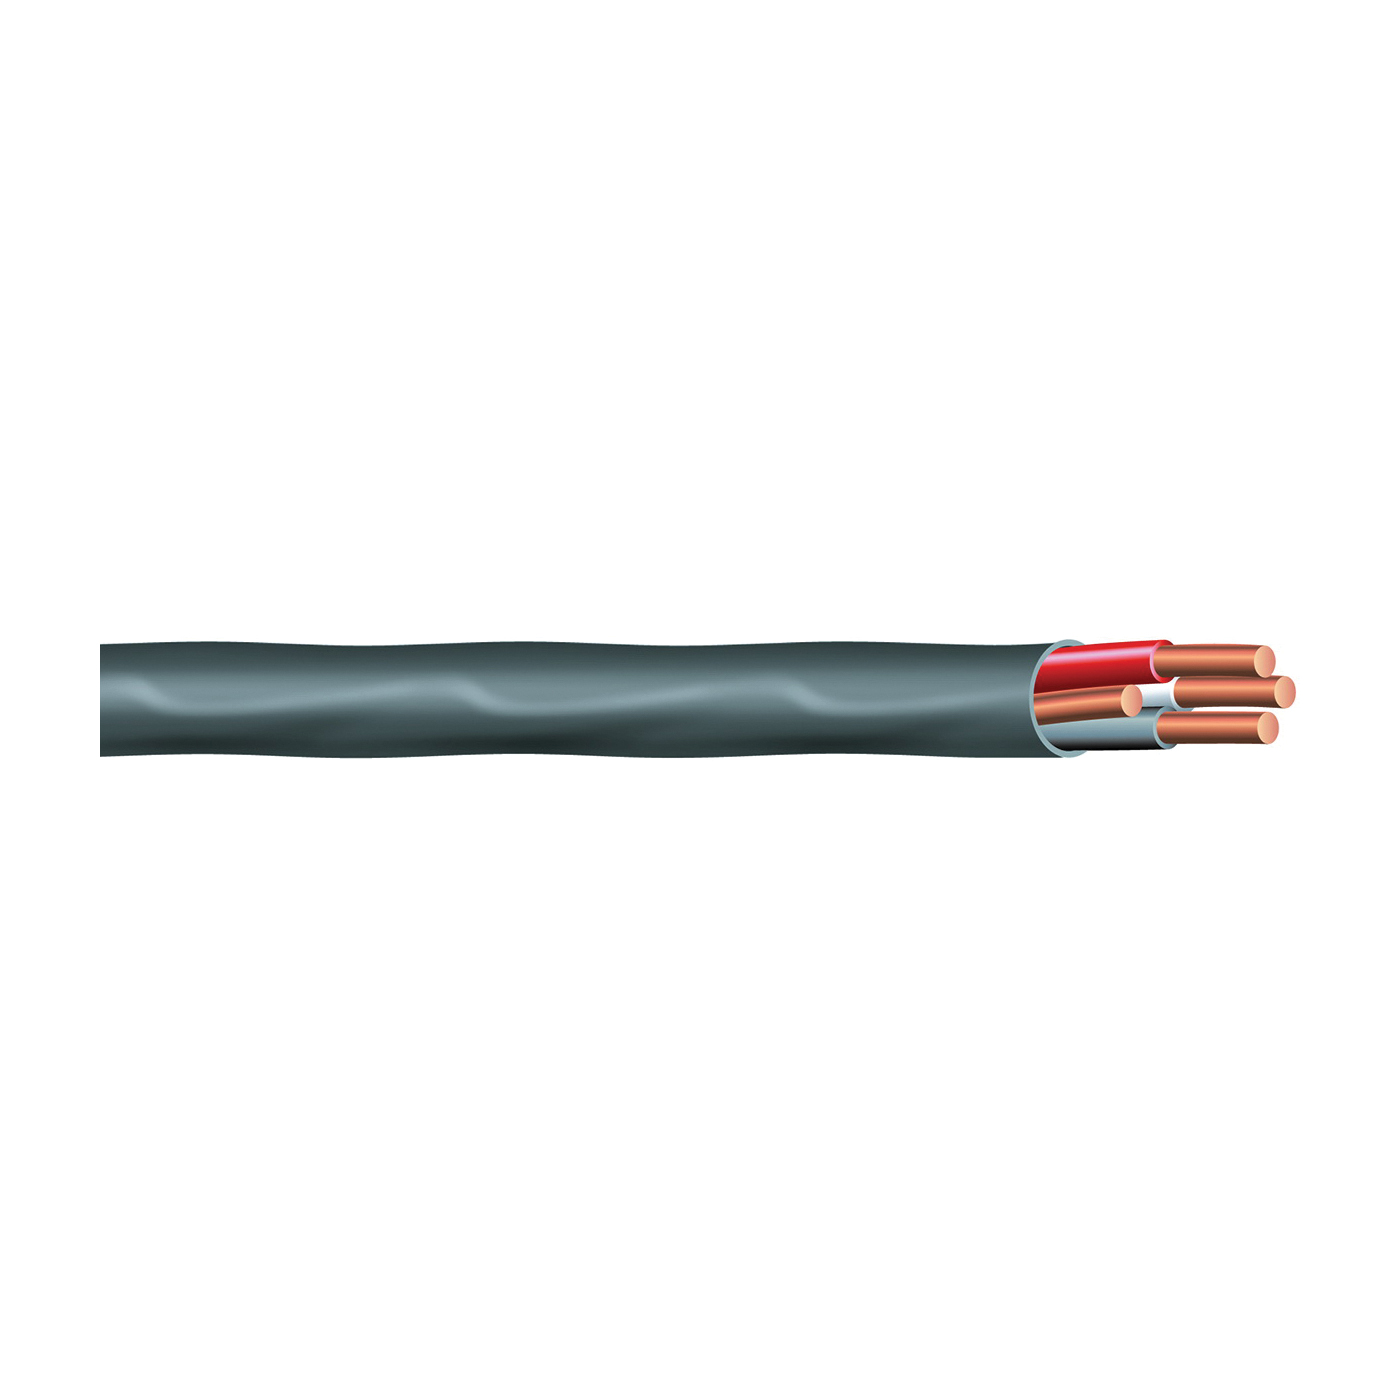 63949221 Sheathed Cable, 8 AWG Wire, 3 -Conductor, 25 ft L, Copper Conductor, PVC Insulation